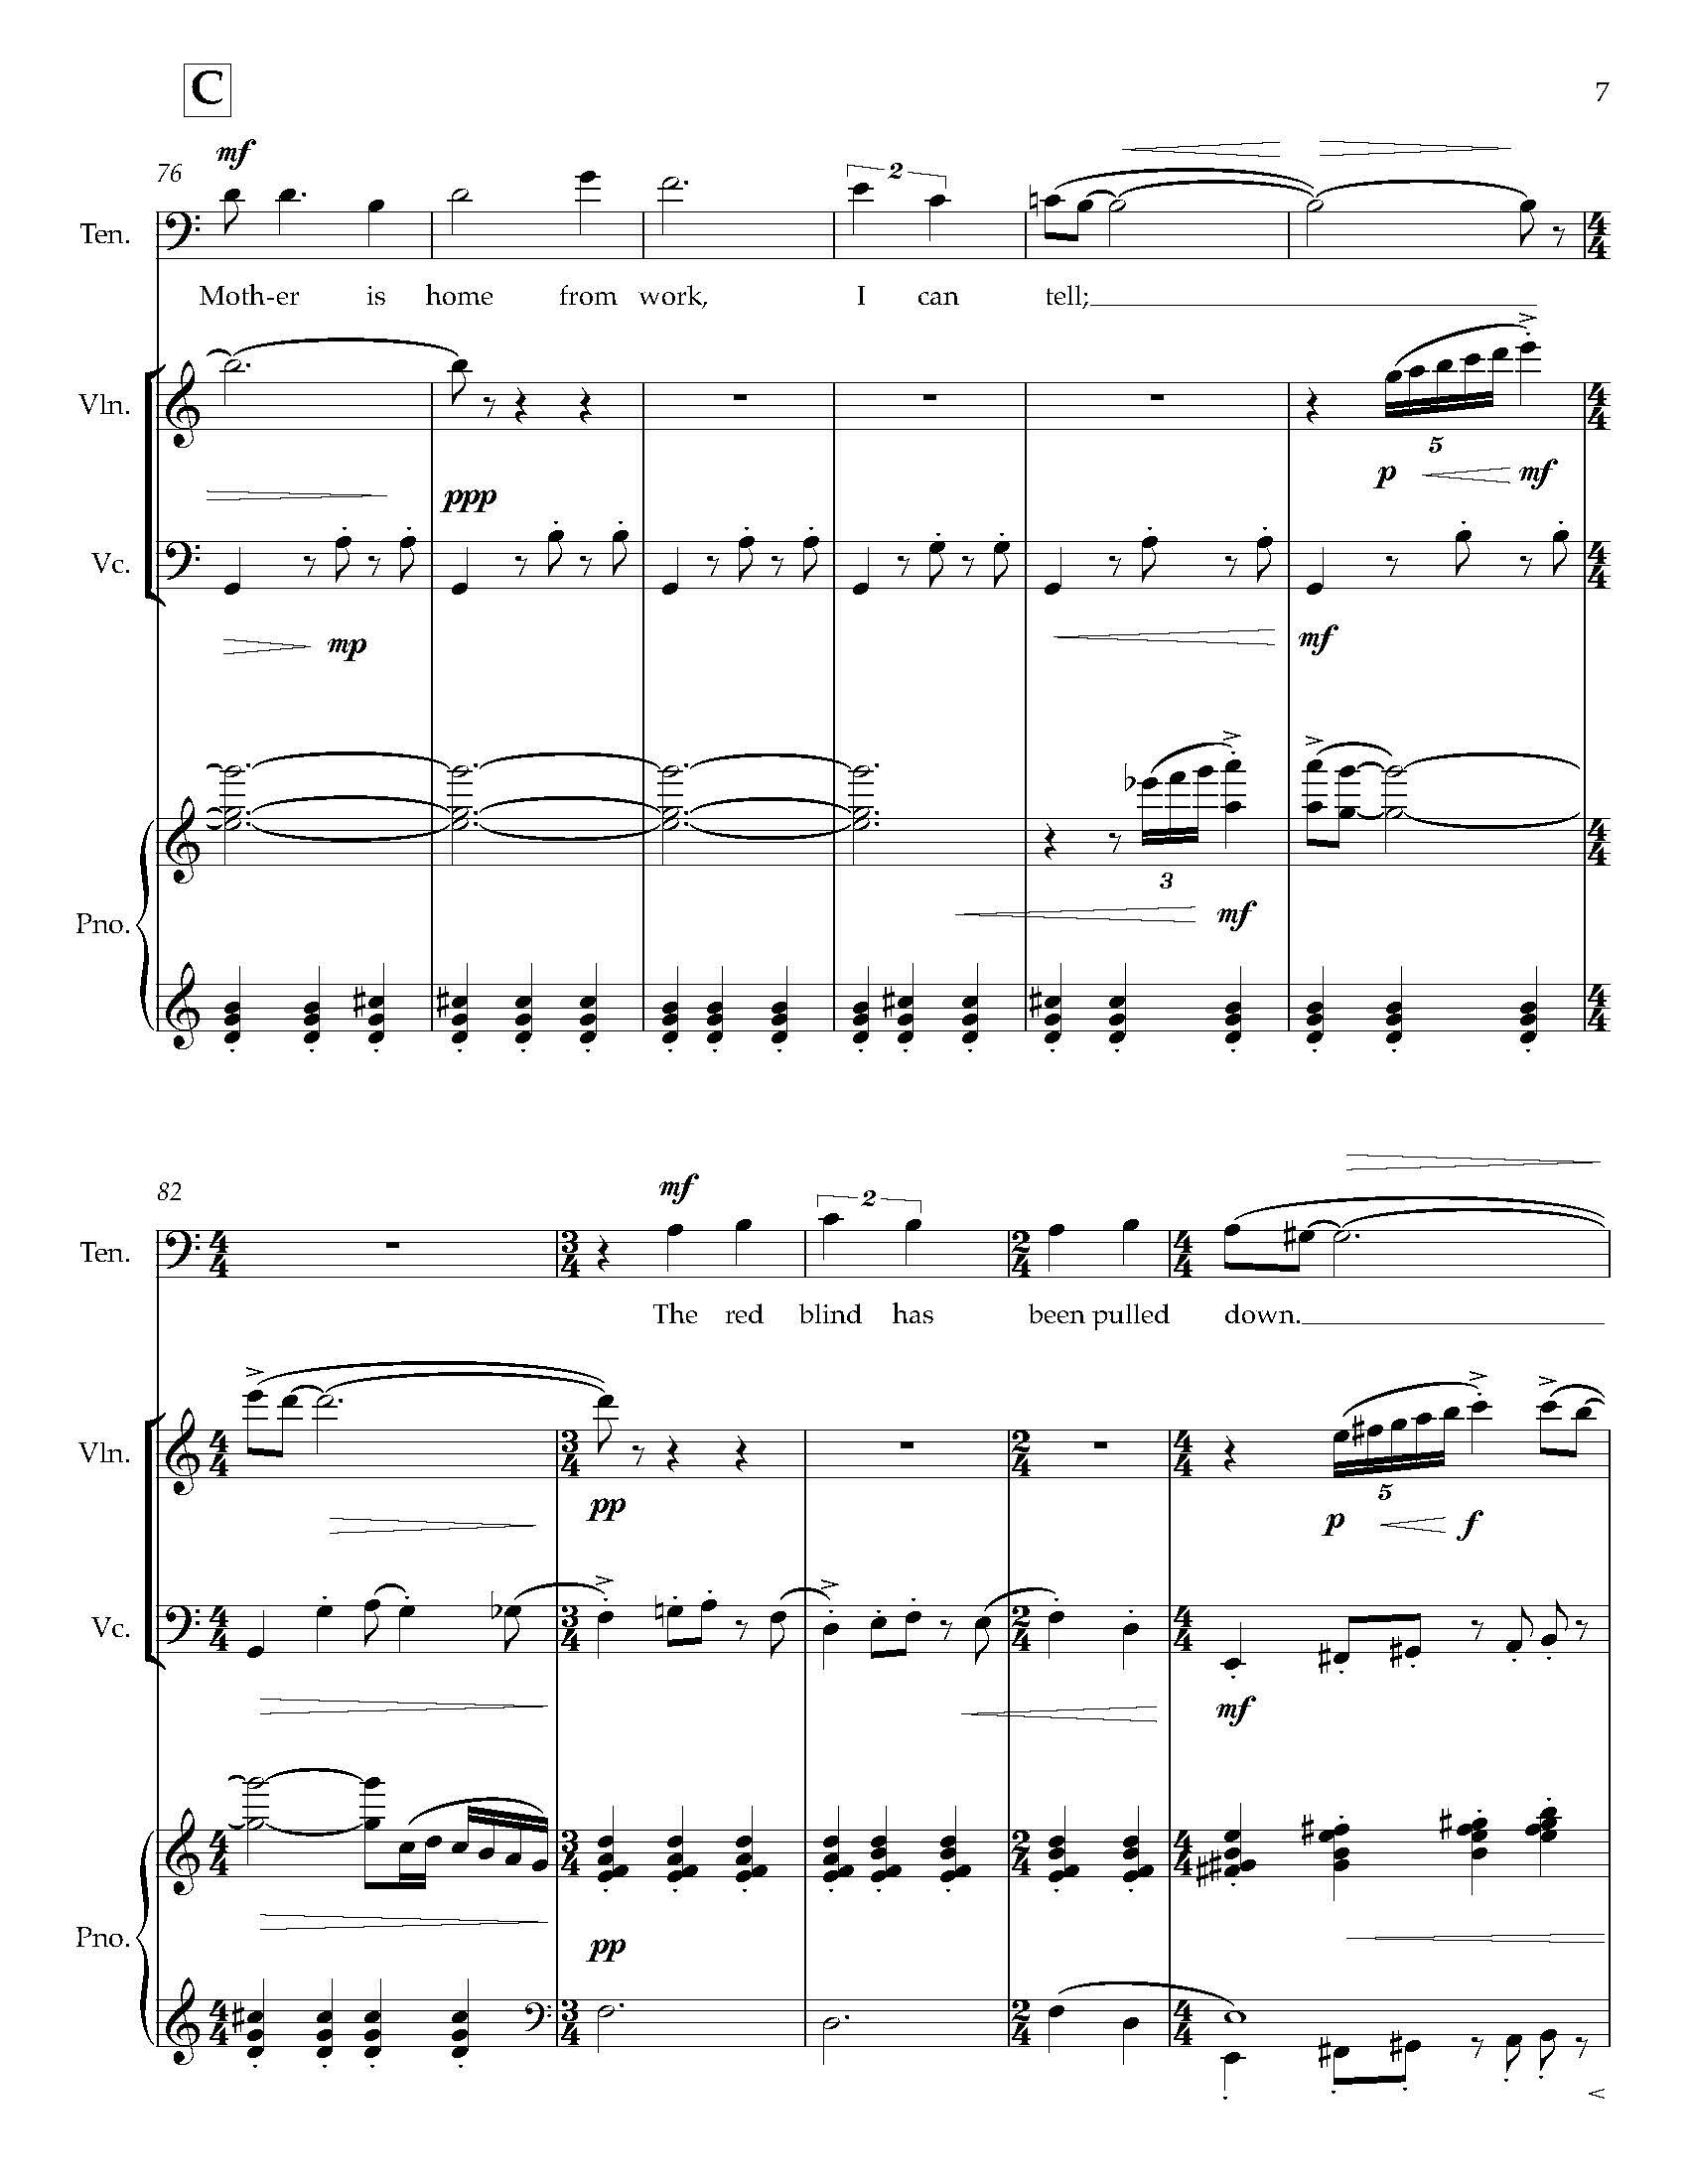 Gursky Songs - Complete Score_Page_15.jpg